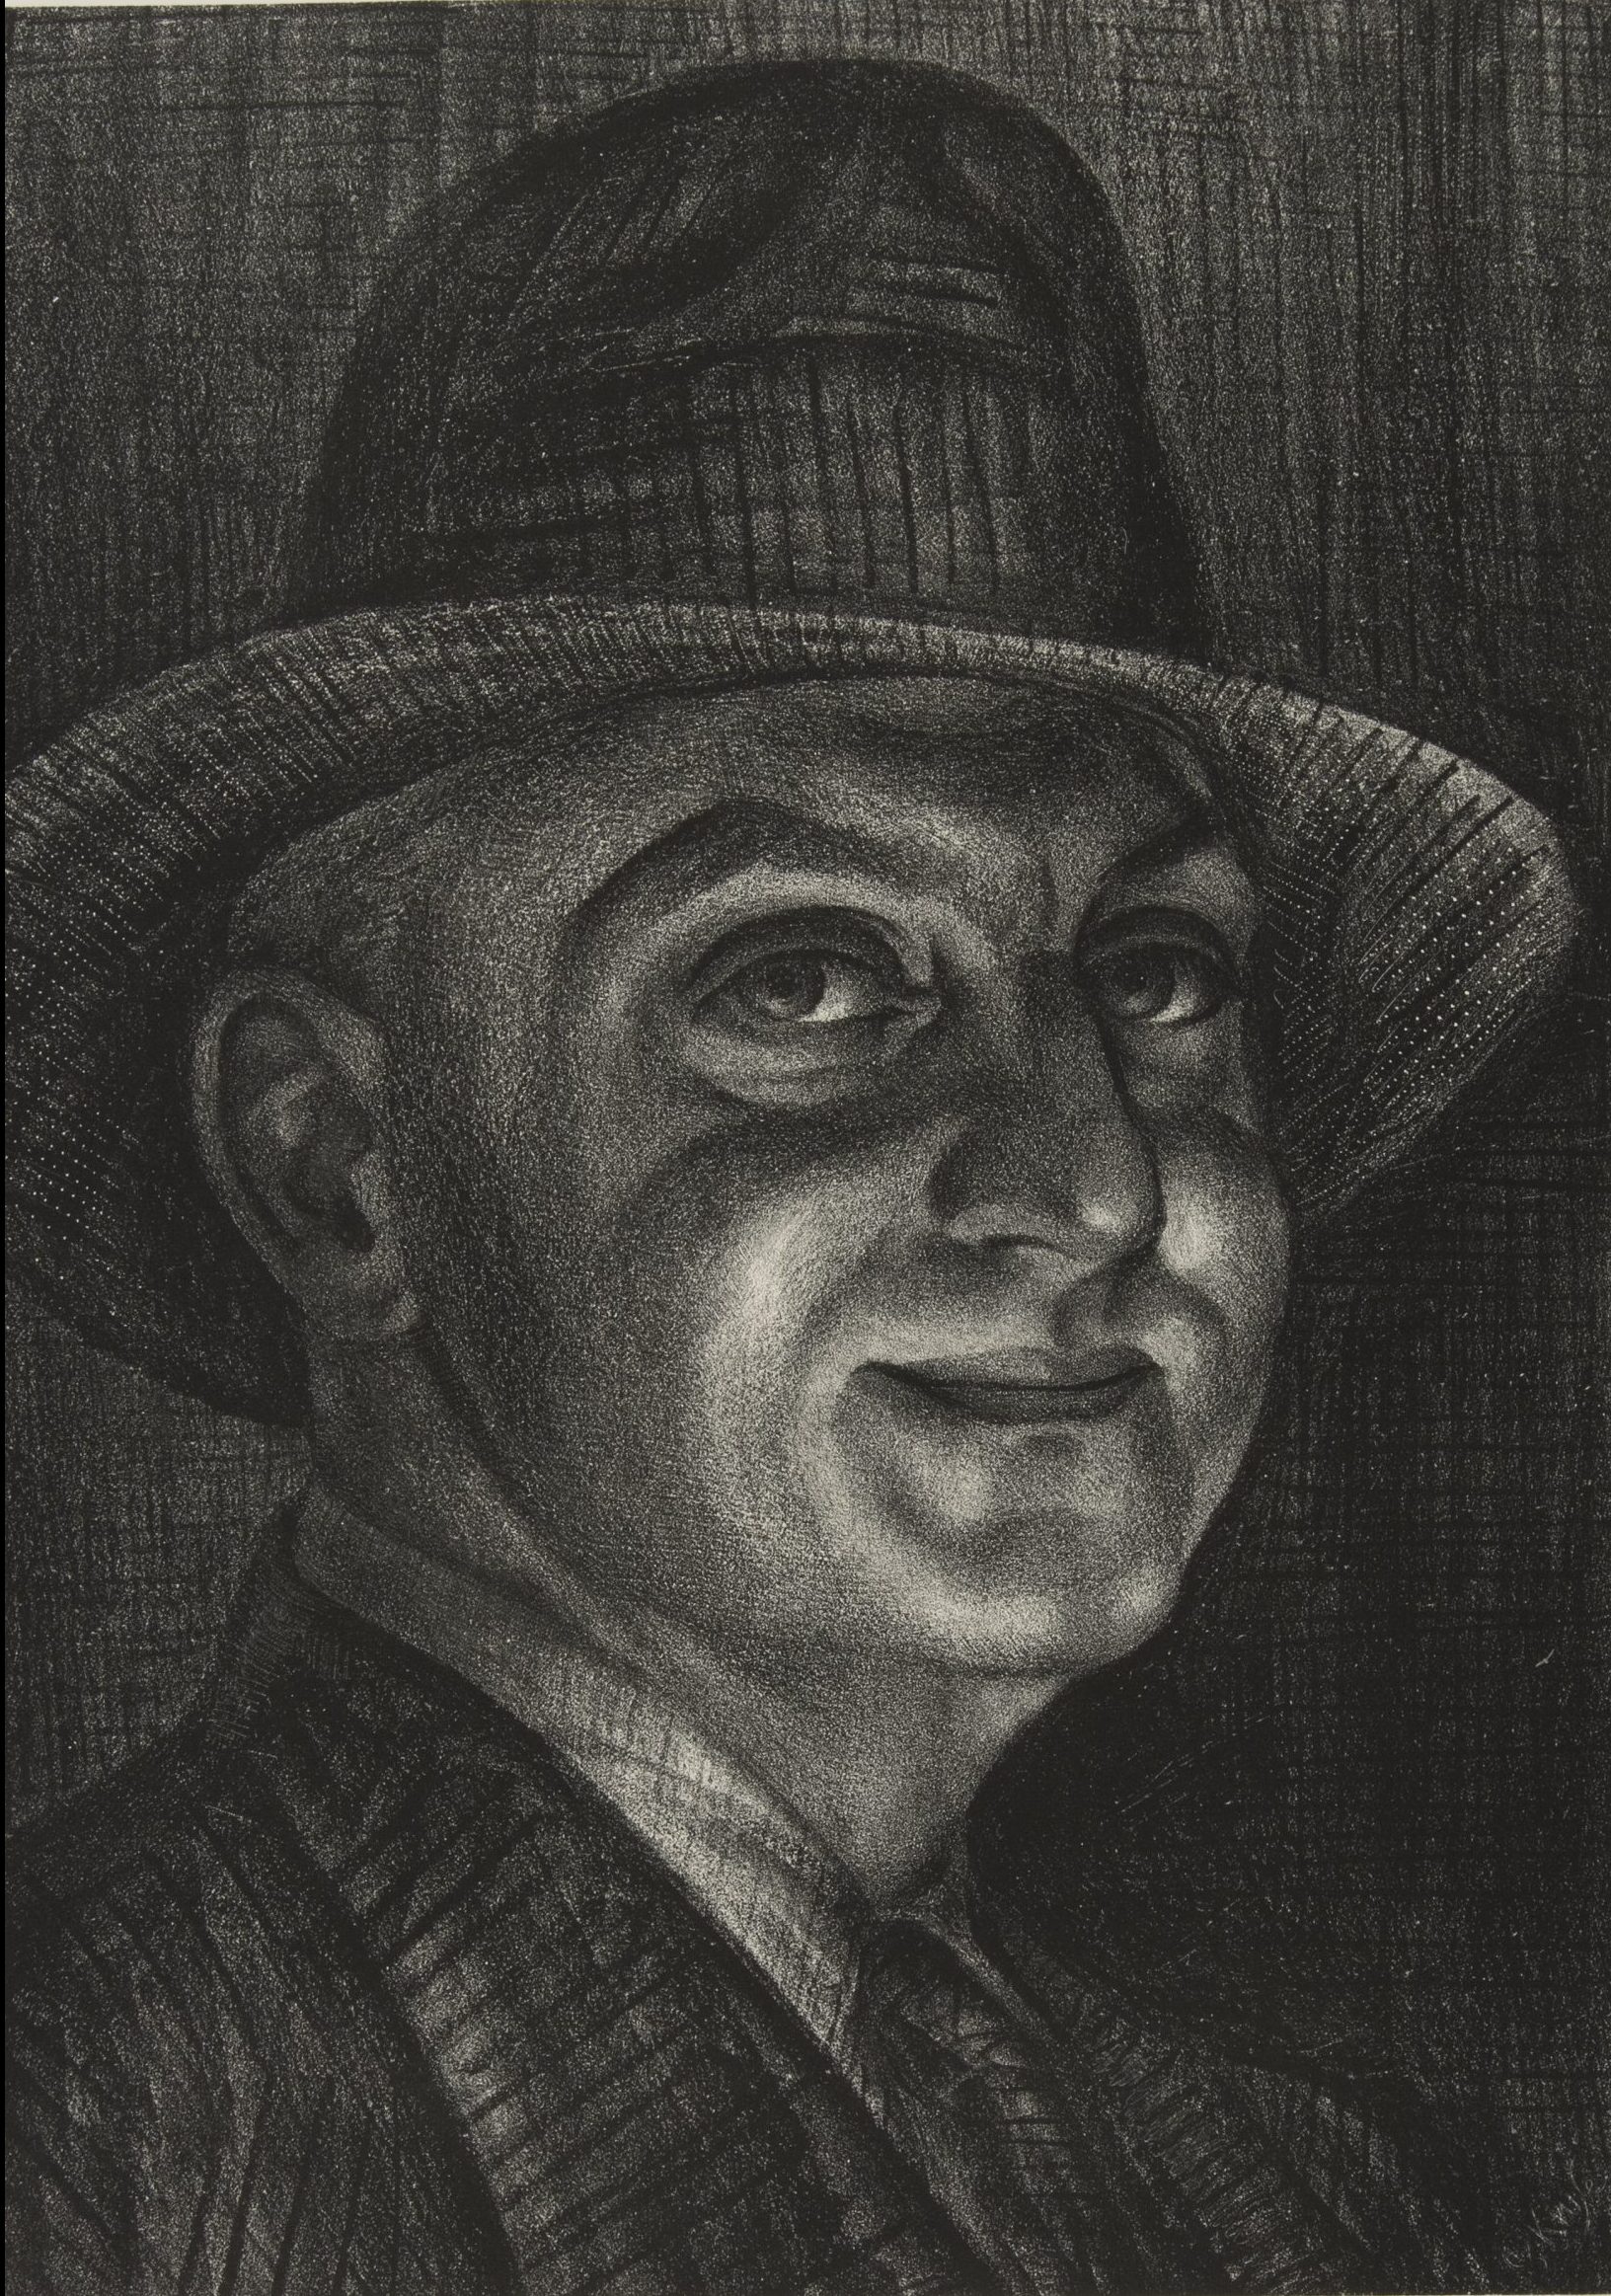 largely black drawing of a man in a dark suit and fedora